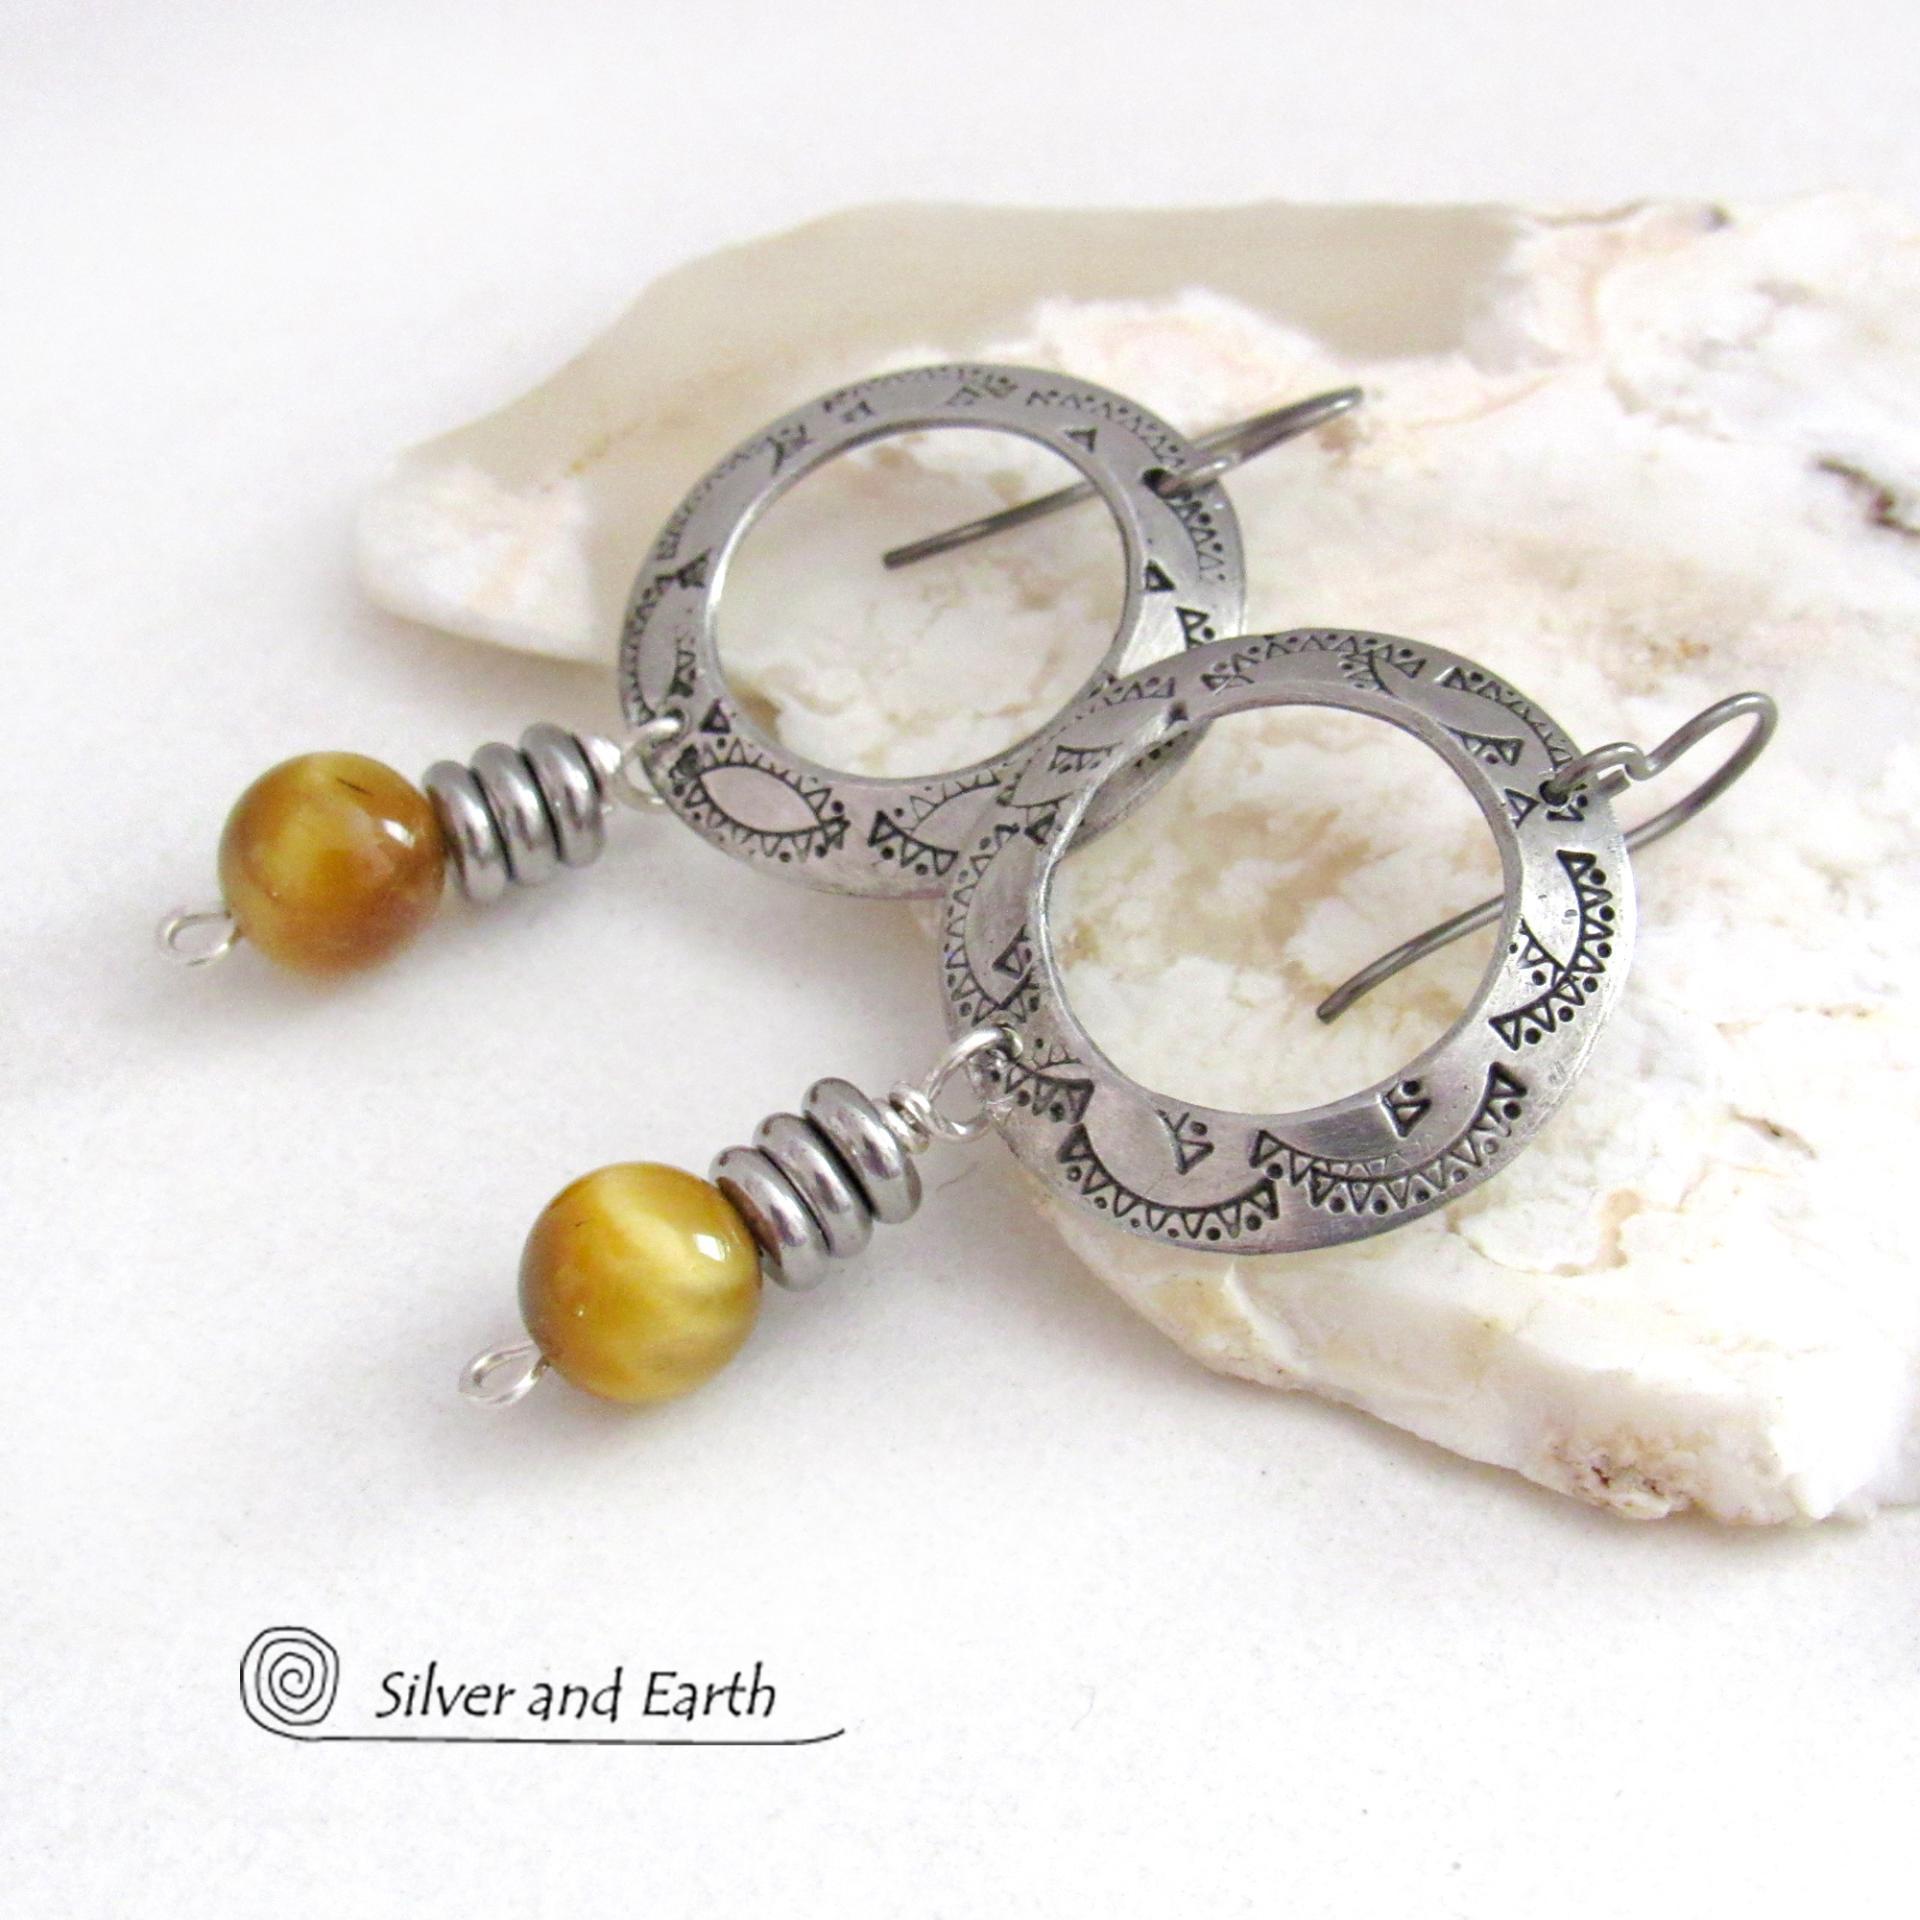 Hand Stamped Silver Pewter Circle Hoop Earrings with Golden Tiger's Eye Gemstone Dangles